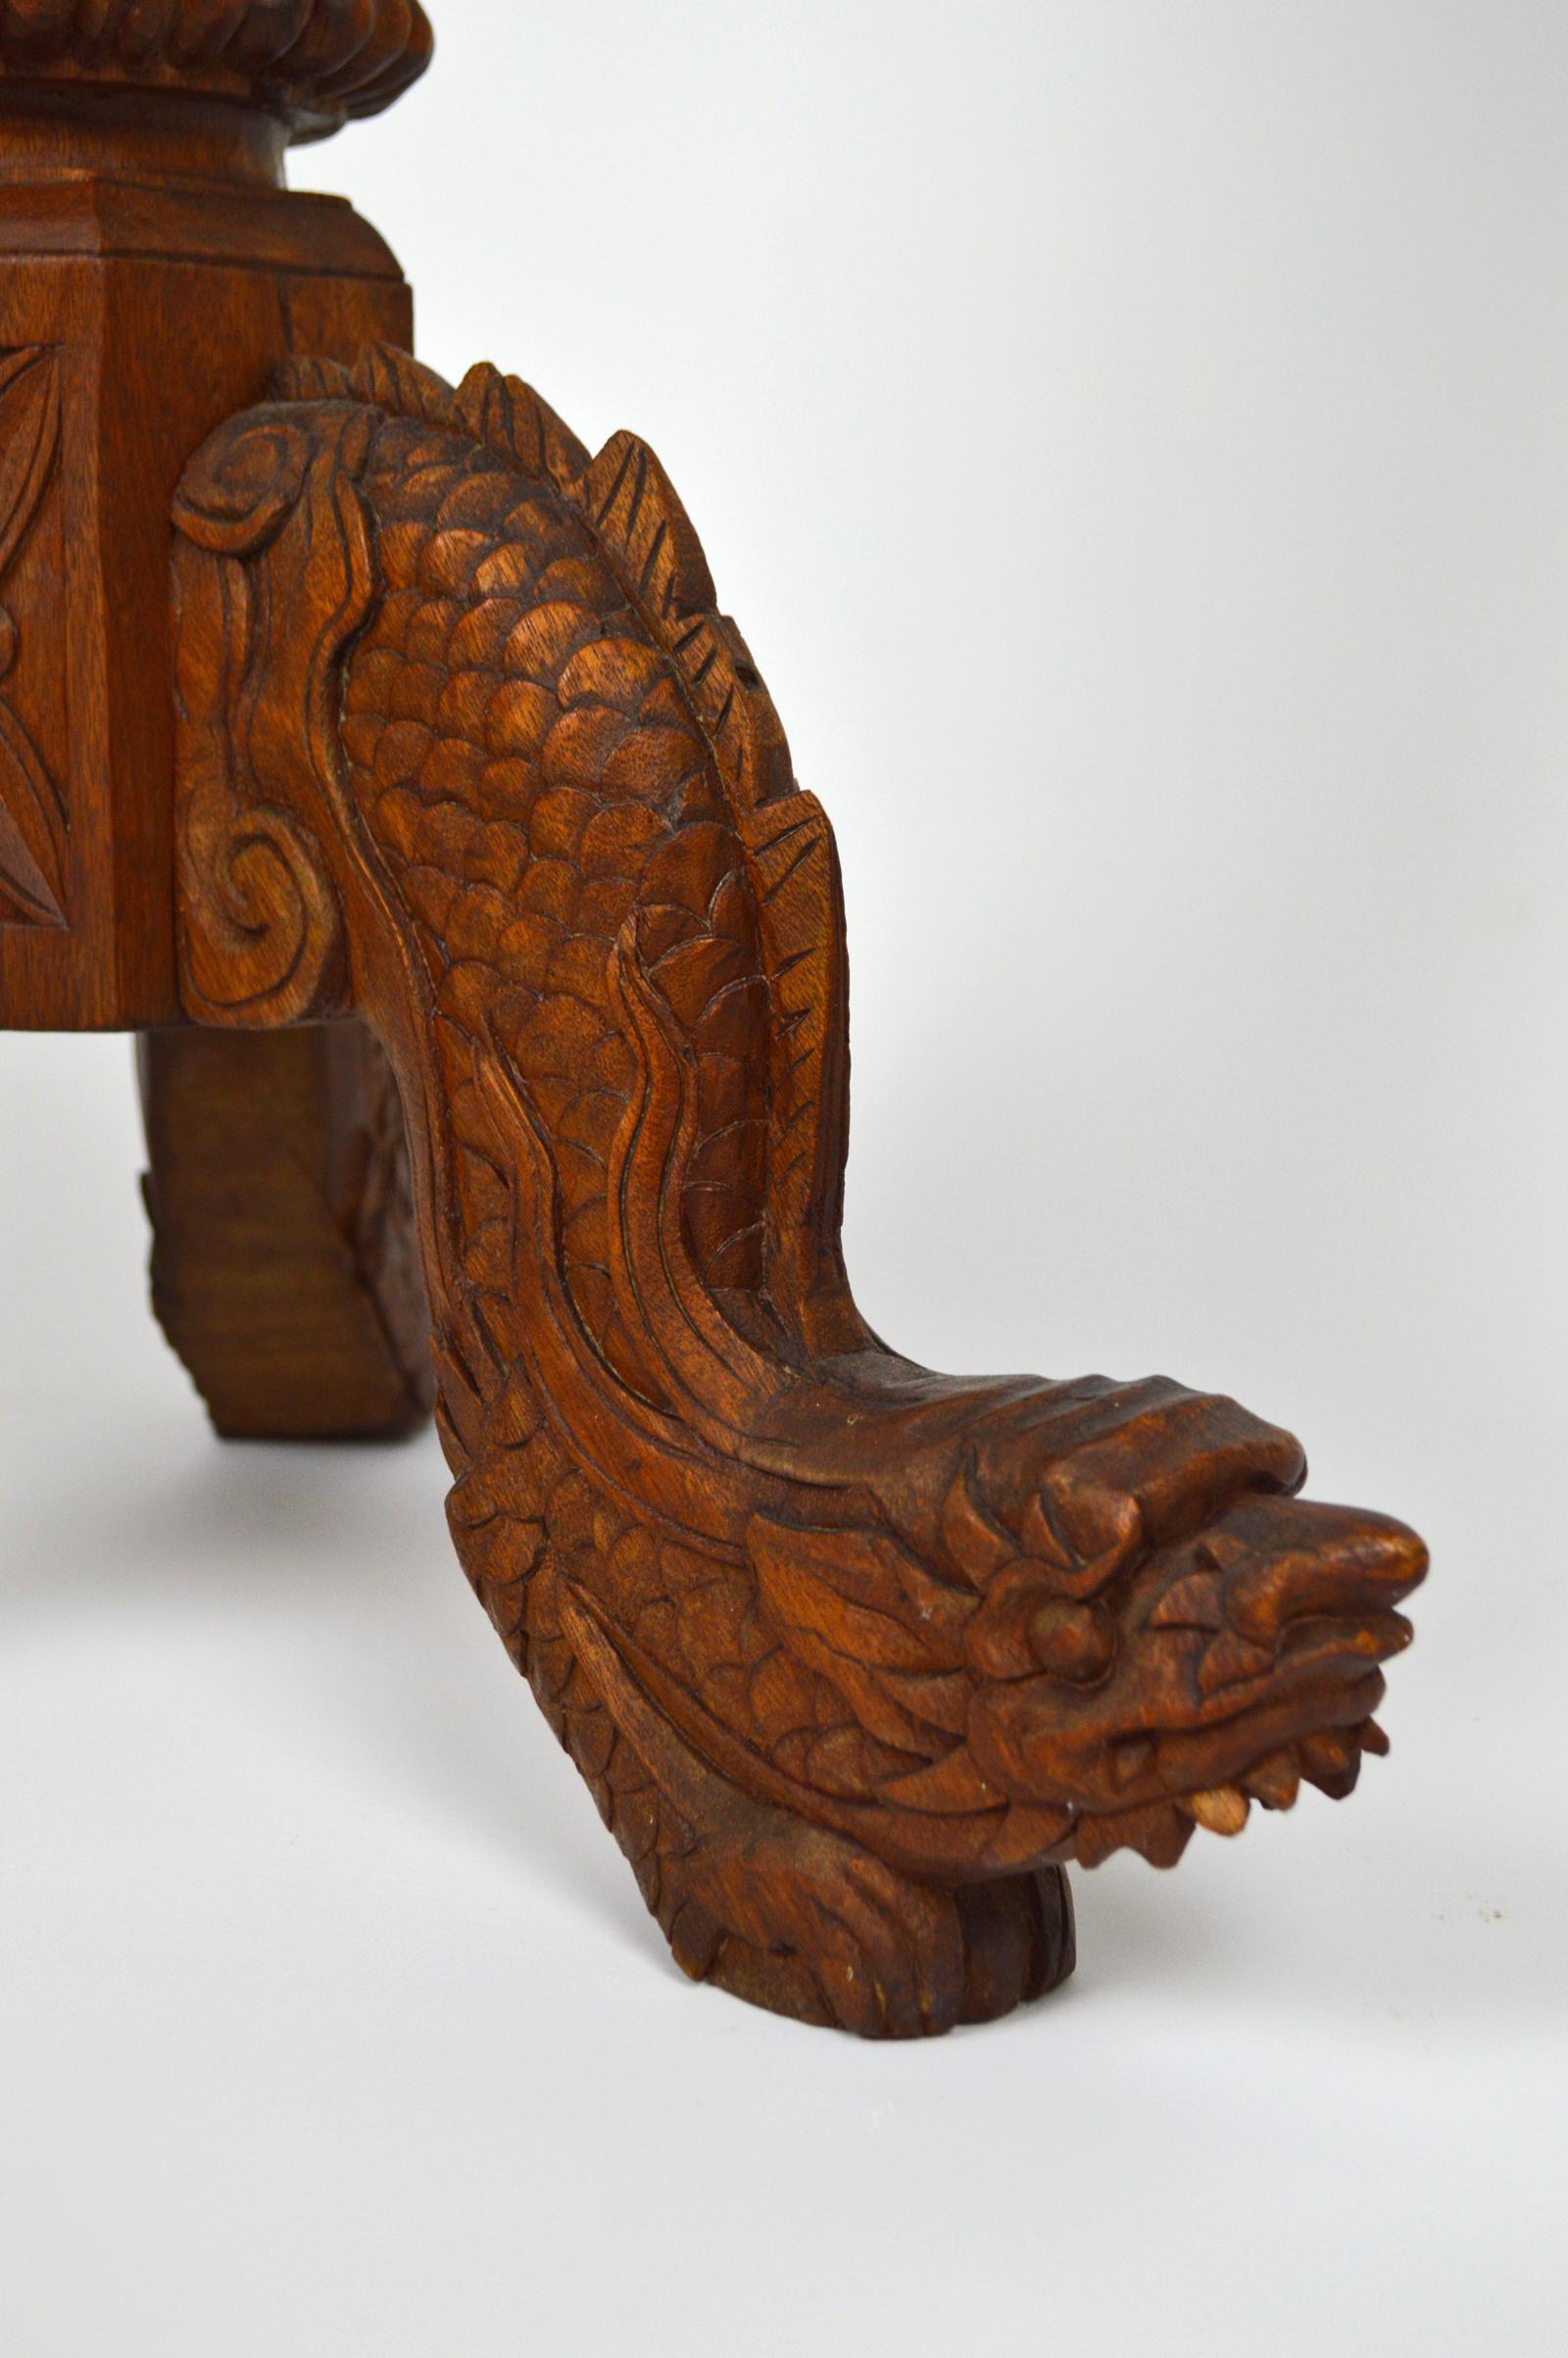 Indochinese Pedestal Table / Pot Stand in Carved Wood, Mythological Theme, 1890s For Sale 5